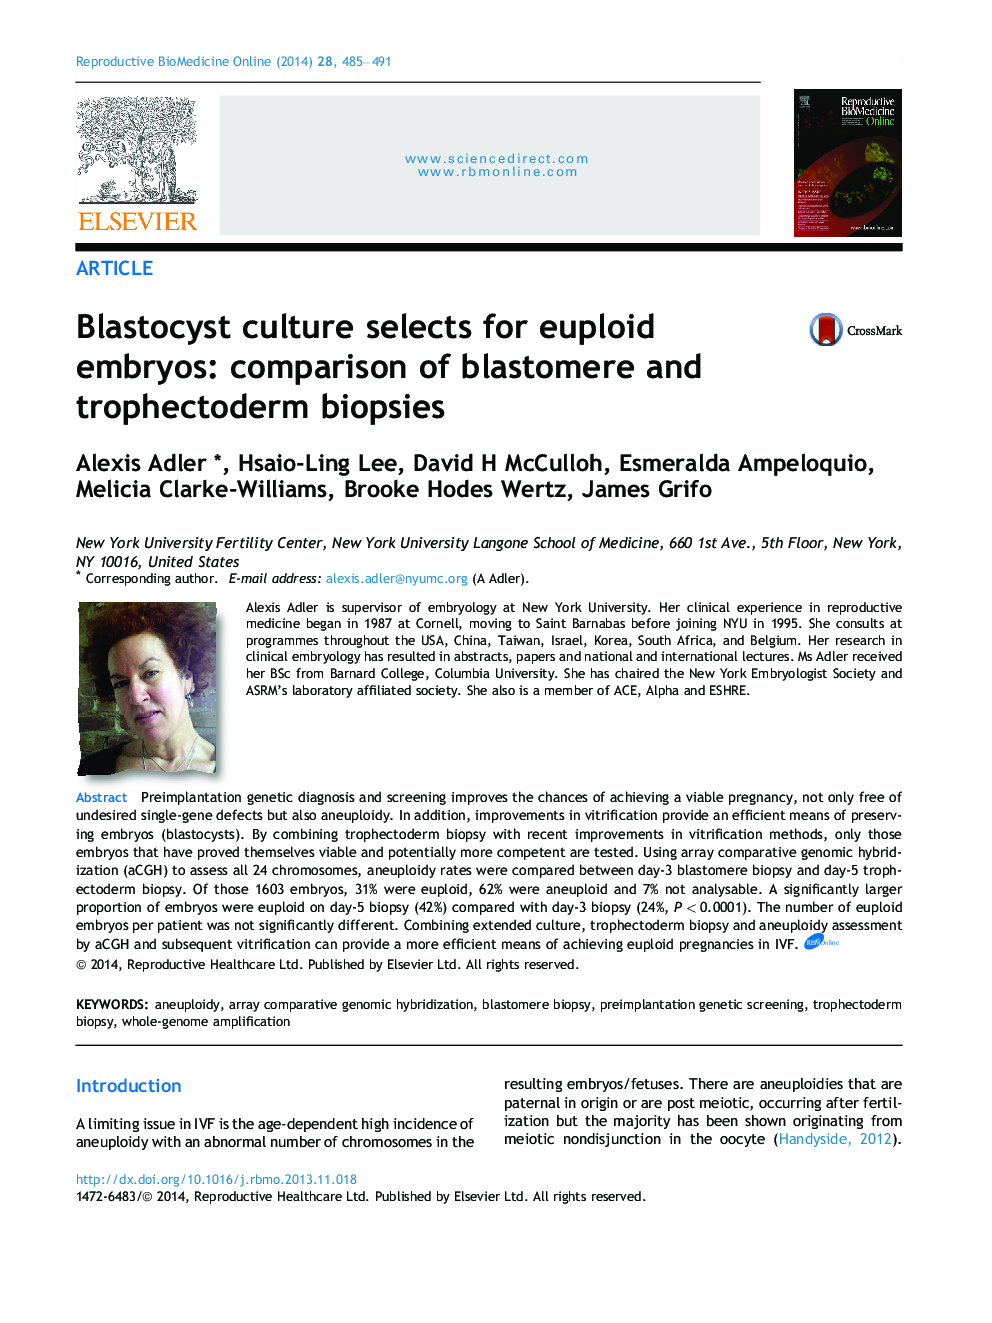 Blastocyst culture selects for euploid embryos: comparison of blastomere and trophectoderm biopsies